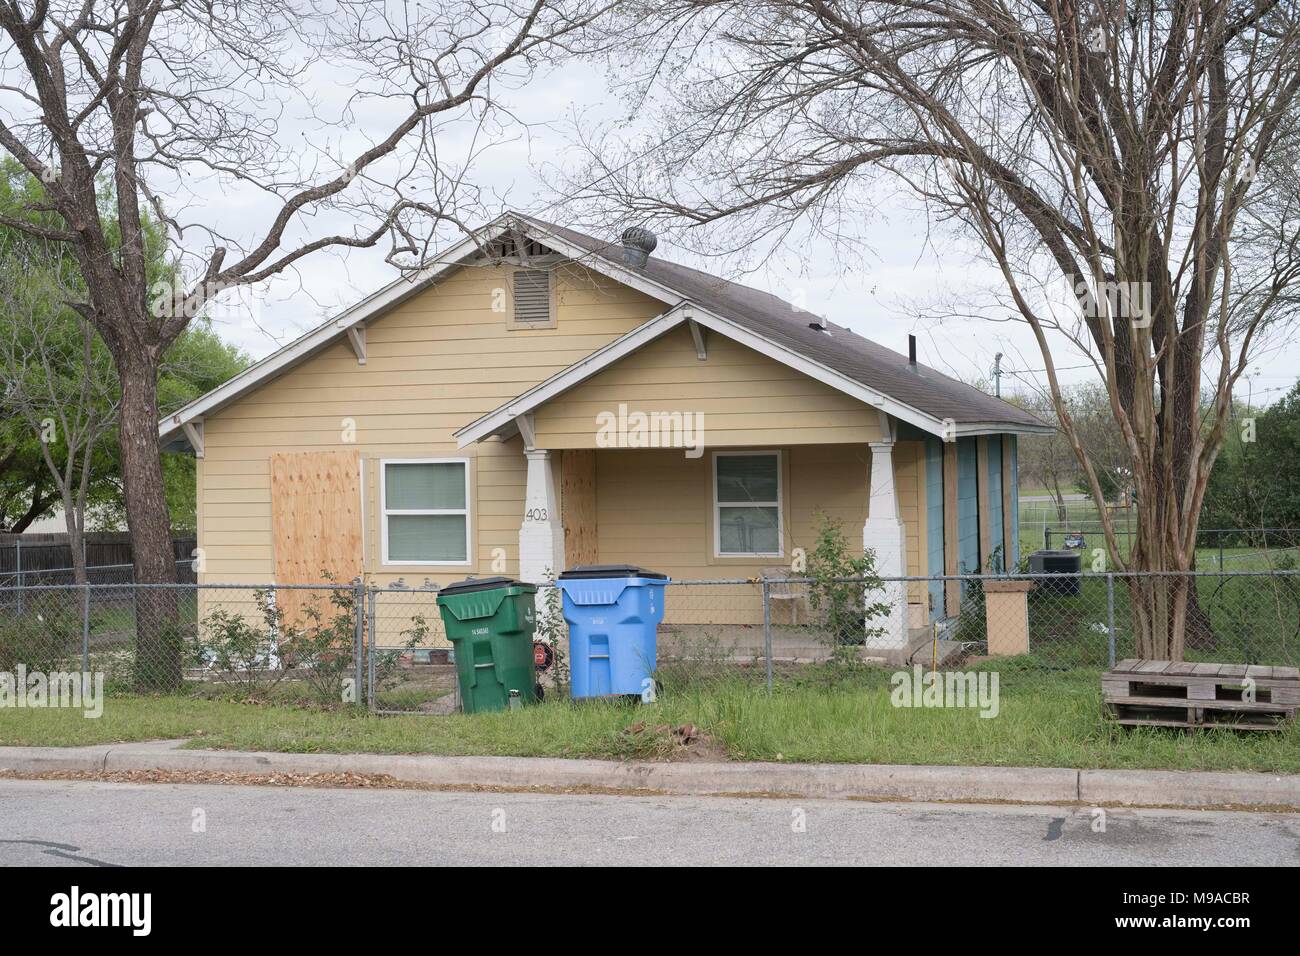 The home of alleged serial bomber Mark A. Conditt sits boarded up in Pflugerville, TX, after being secured by a bomb squad. Stock Photo